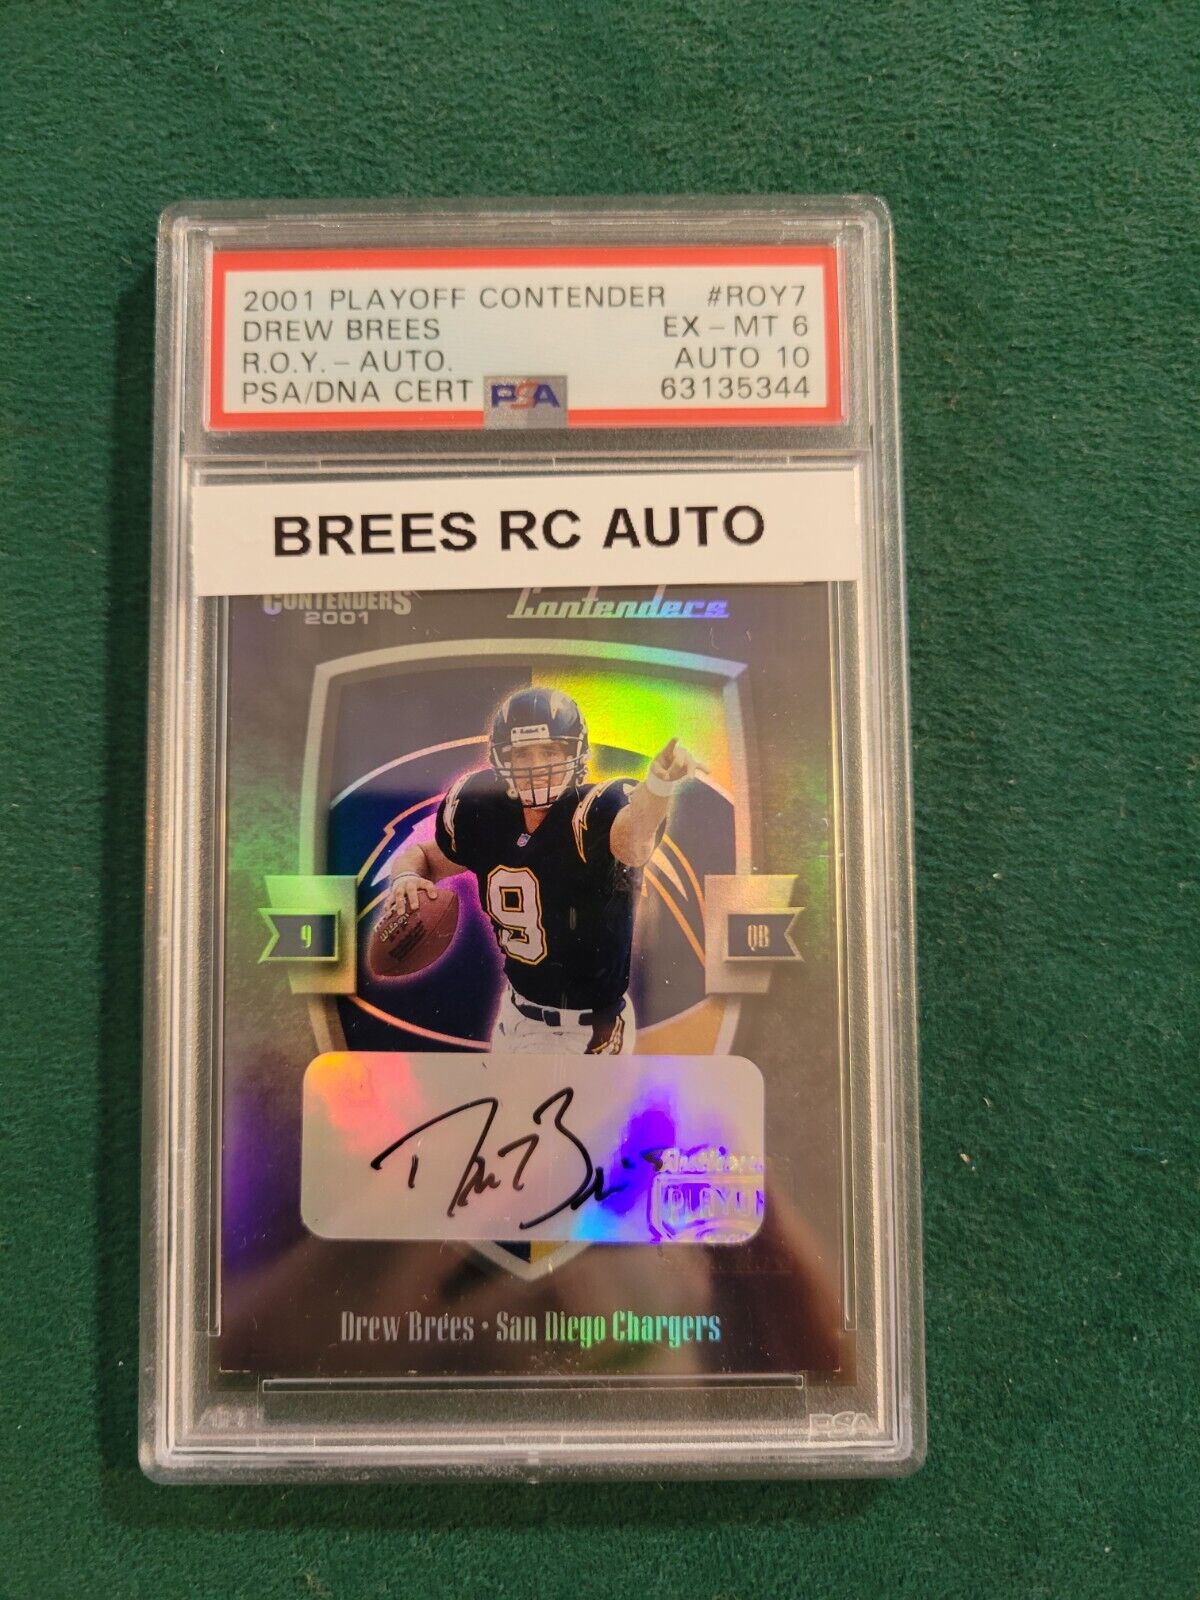 2001-Playoff-Contenders-Rookie-of-the-Year-Contenders-Autograph-Drew-Brees-PSA-6-304571262909